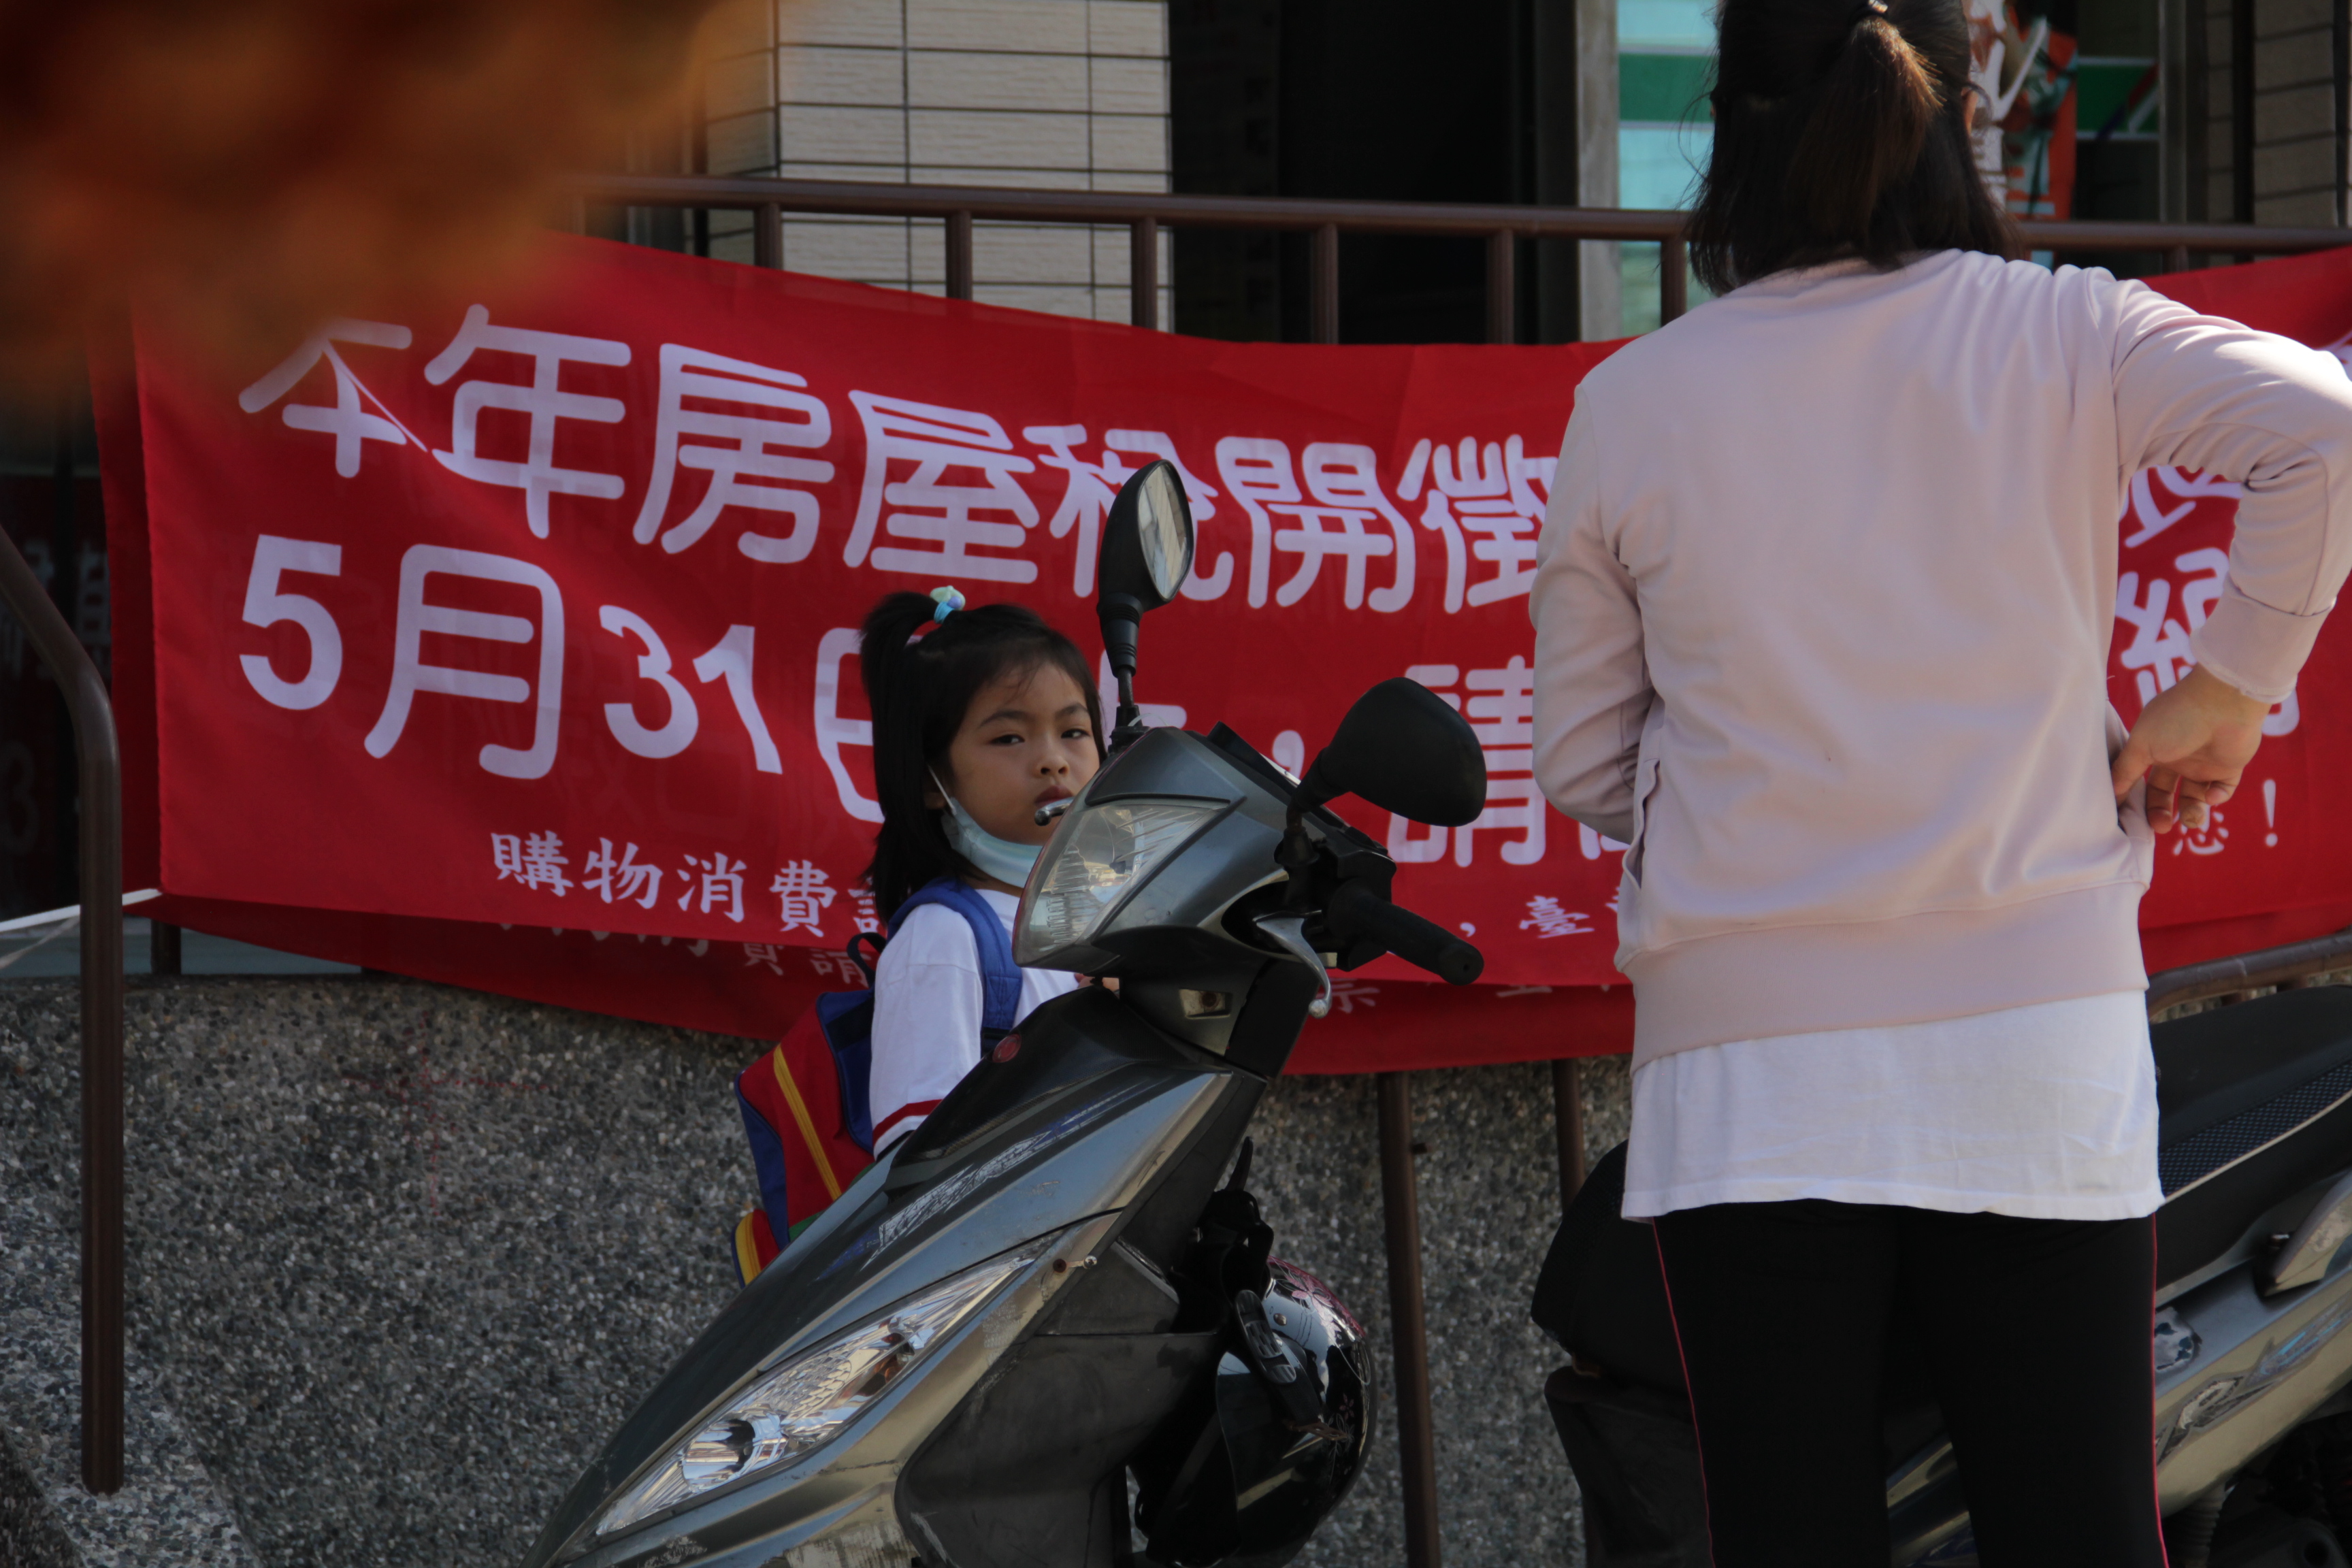 Little girl in school uniform - the higher education is on mainland Taiwan